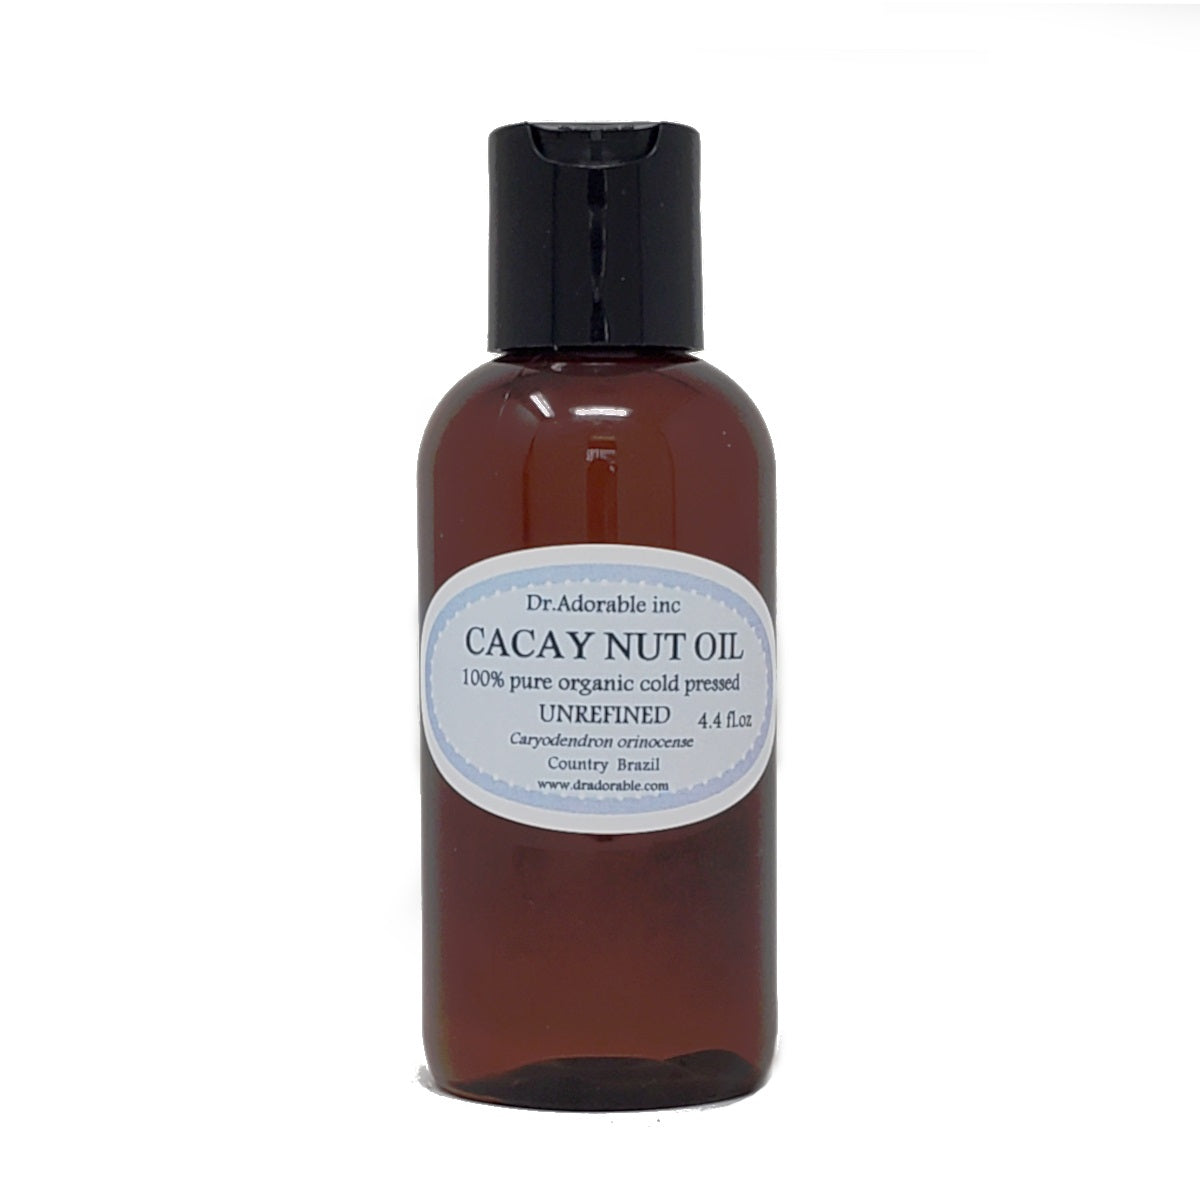 Cacay Nut Oil Unrefined - Pure Cold Pressed Organic Fresh Skin Hair Care